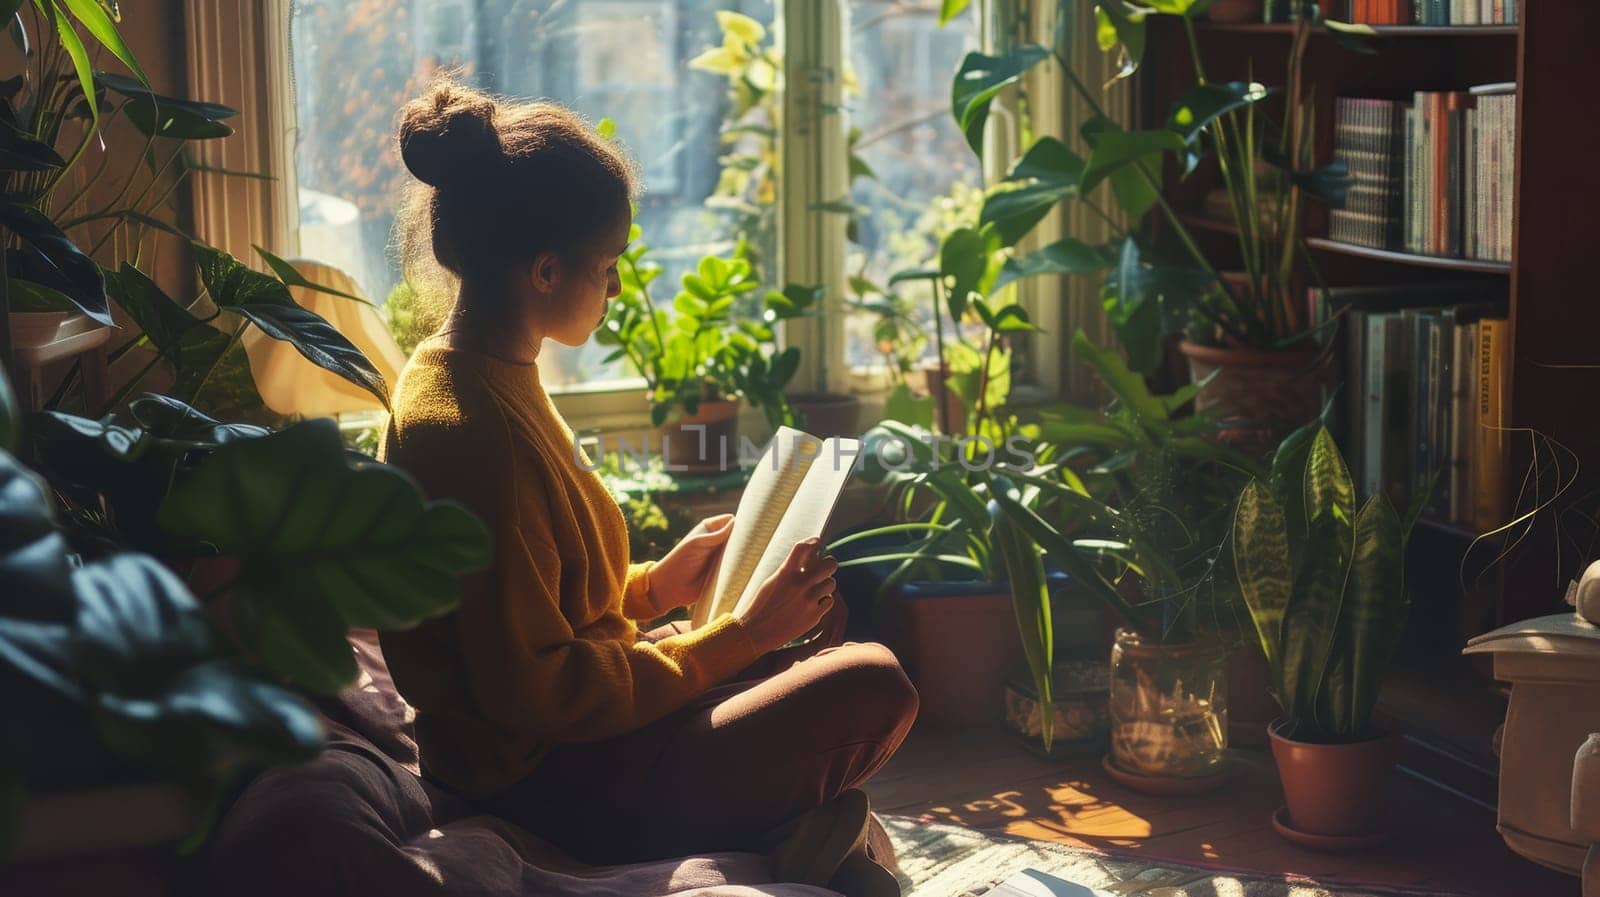 Young woman engrossed in a book, surrounded by the lush greenery of her sunny indoor garden